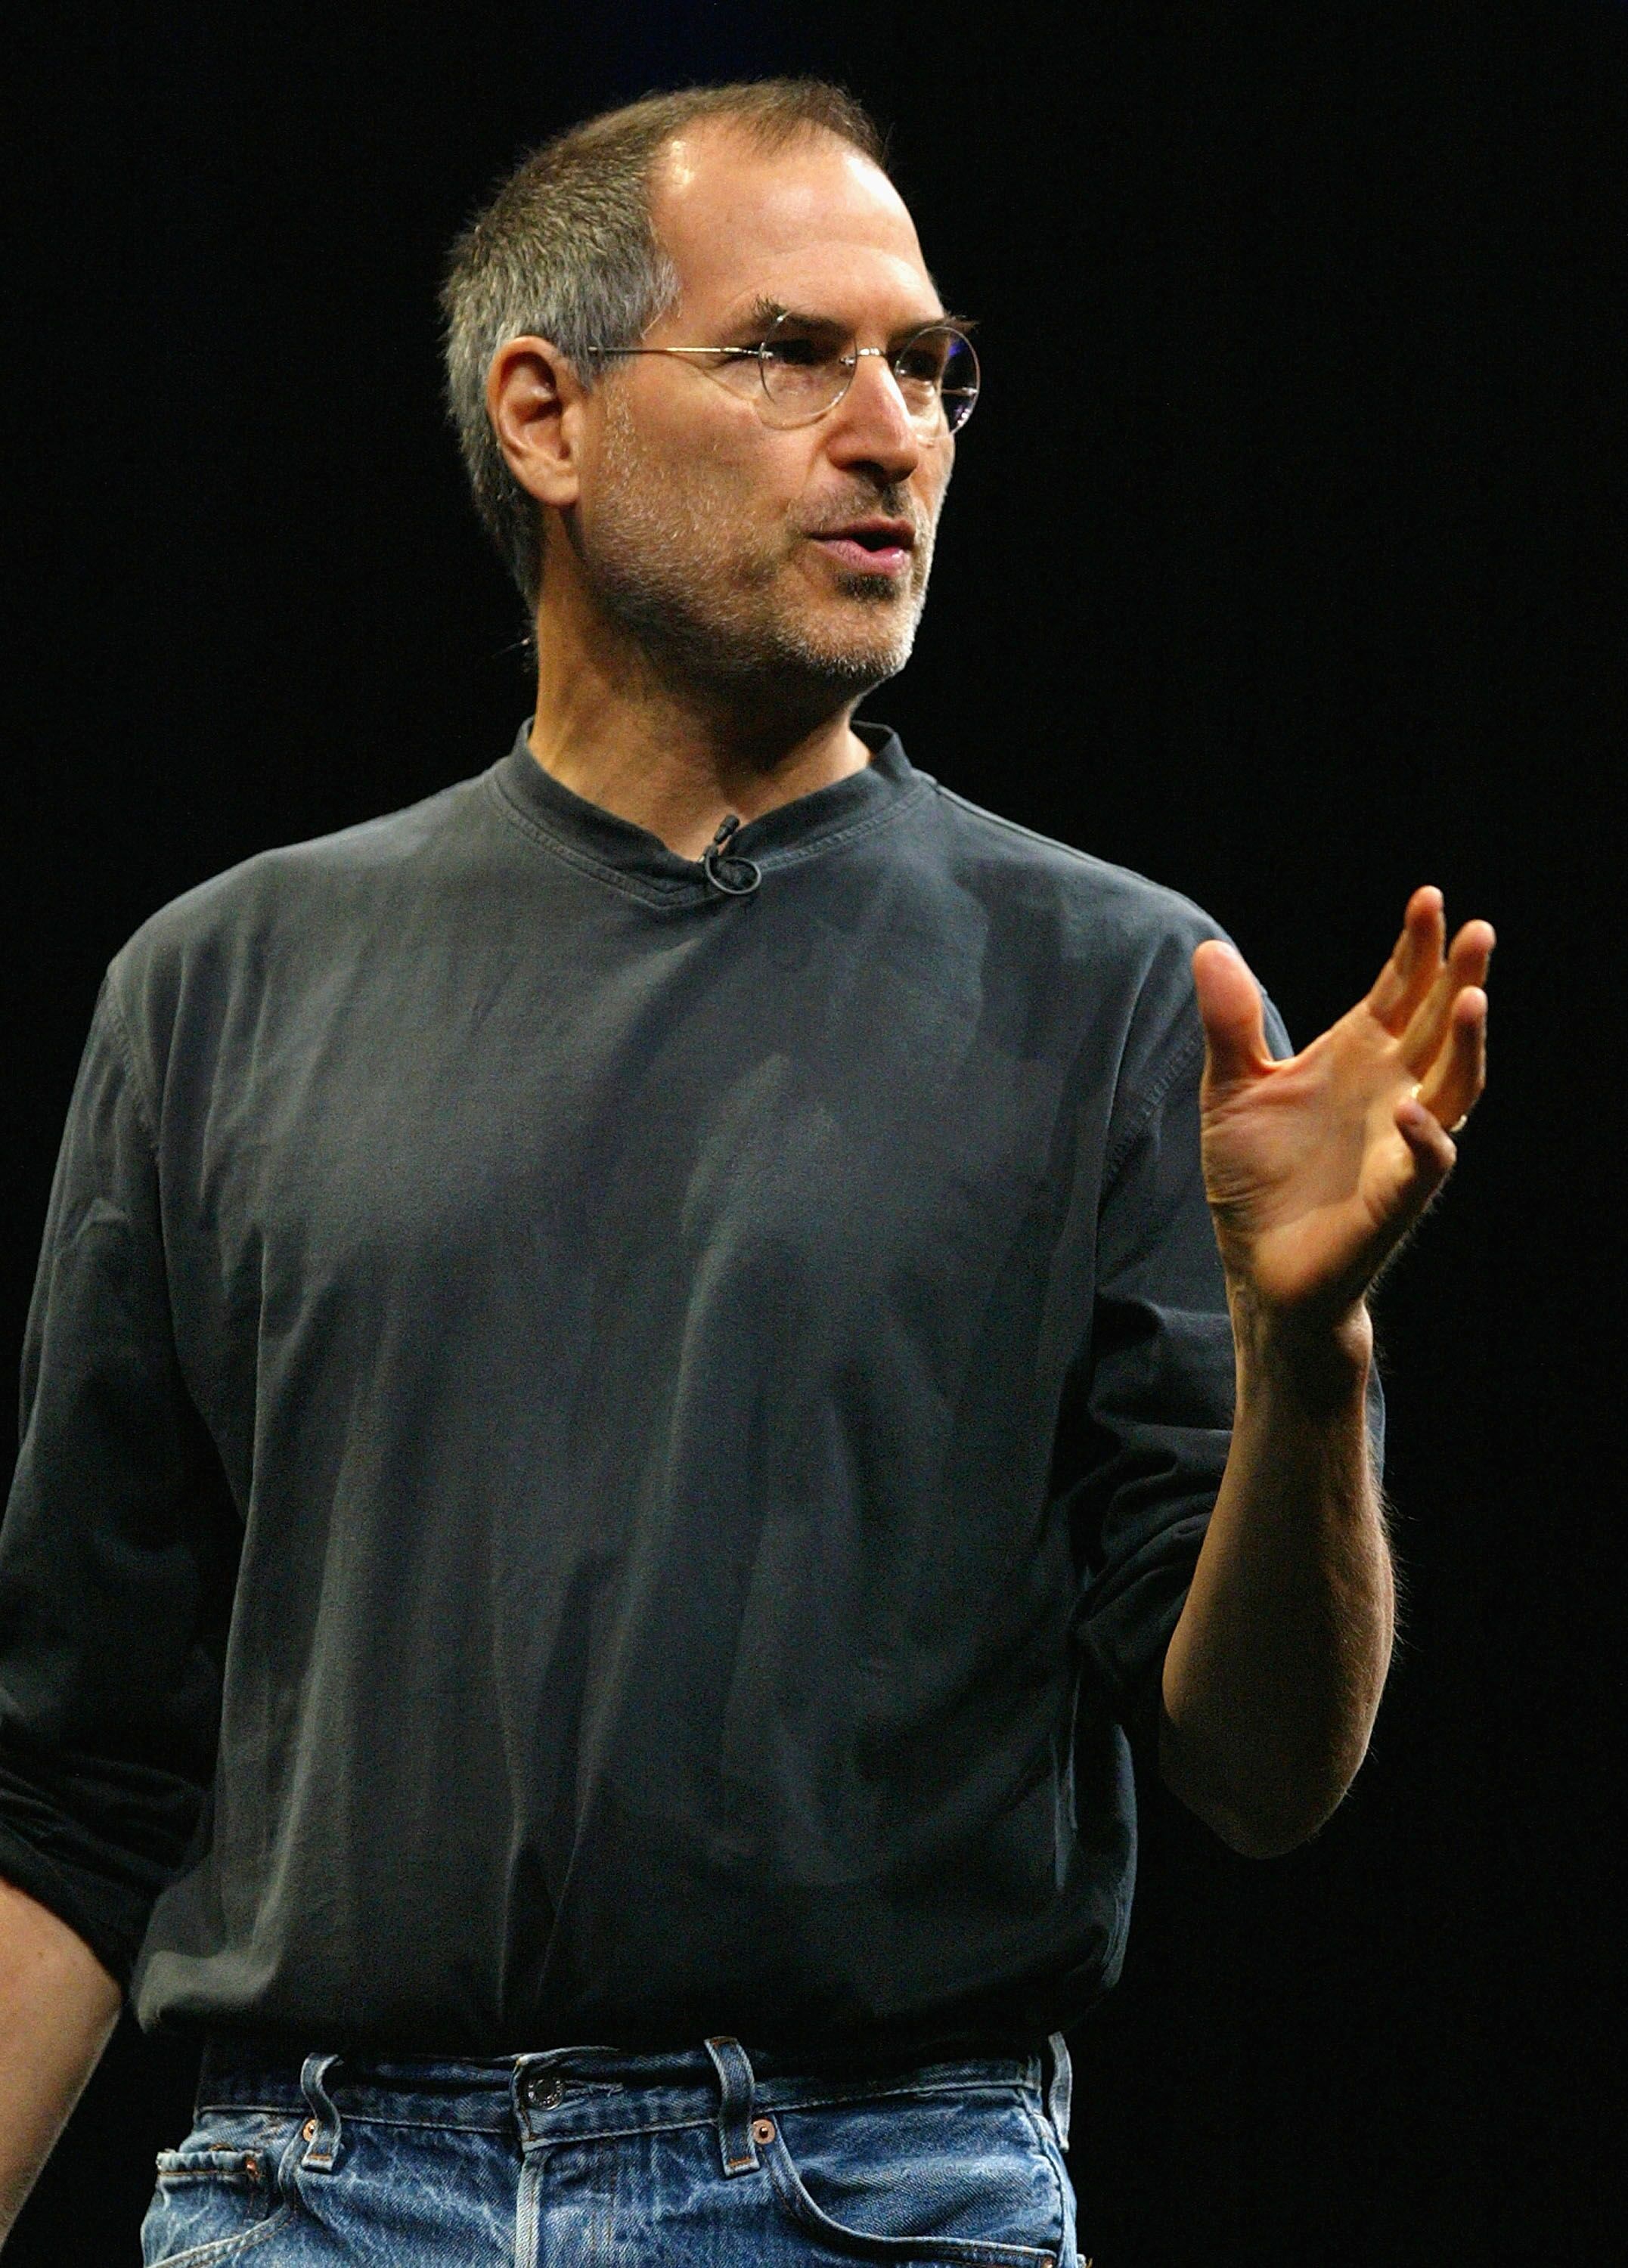 Steve Jobs delivers the keynote address at the 2004 Worldwide Developers Conference. | Source: Getty Images